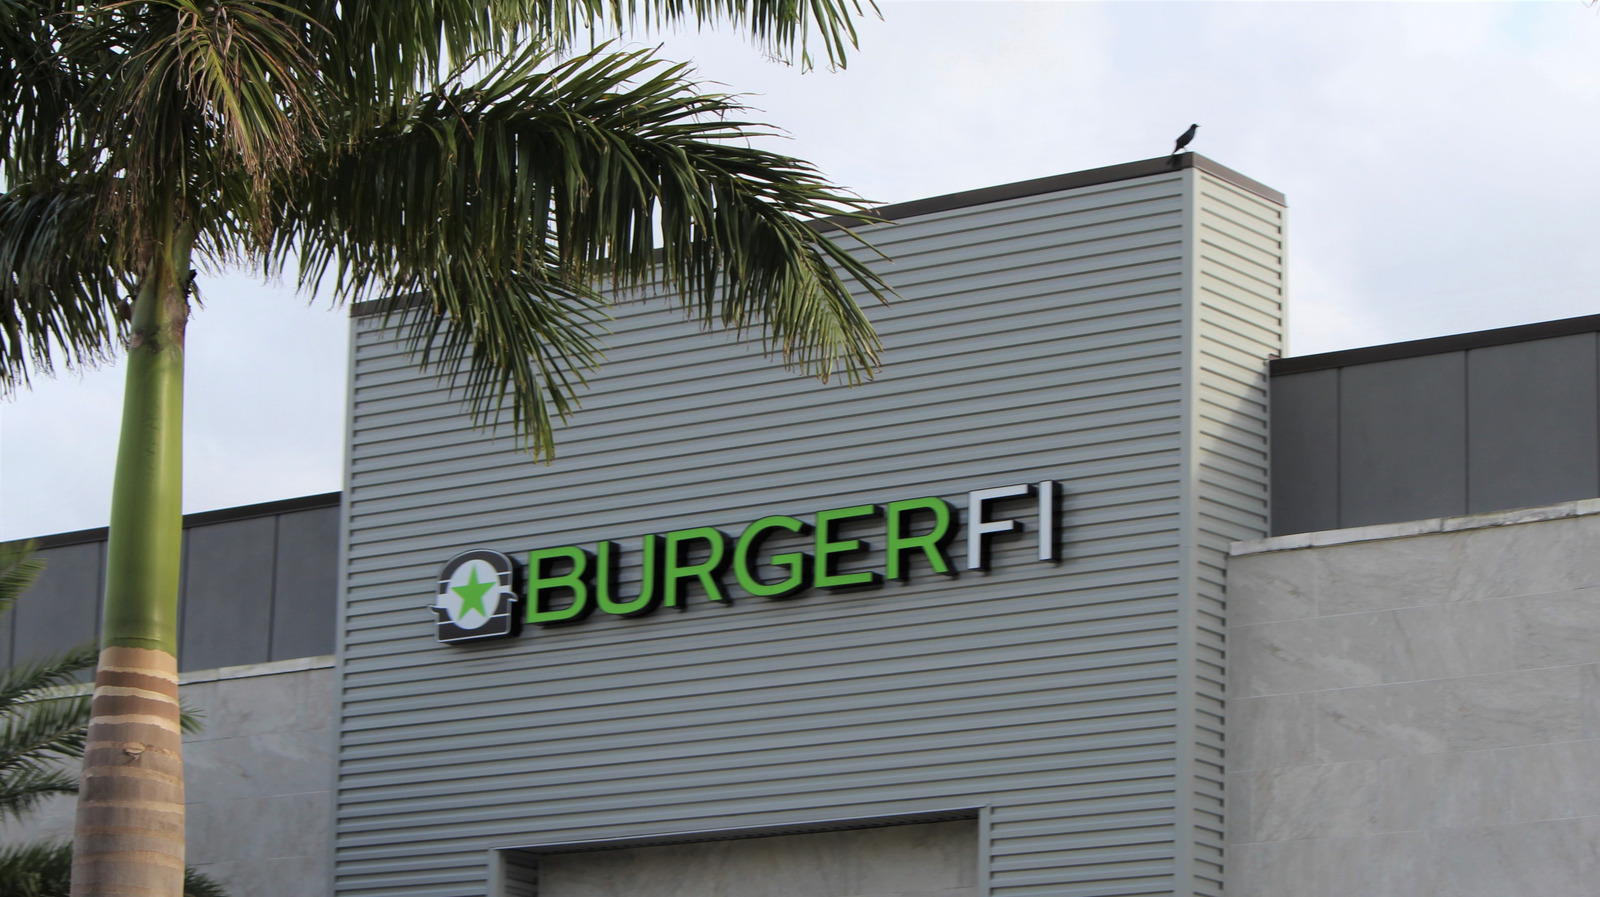 Details You Didn't Know About BurgerFi